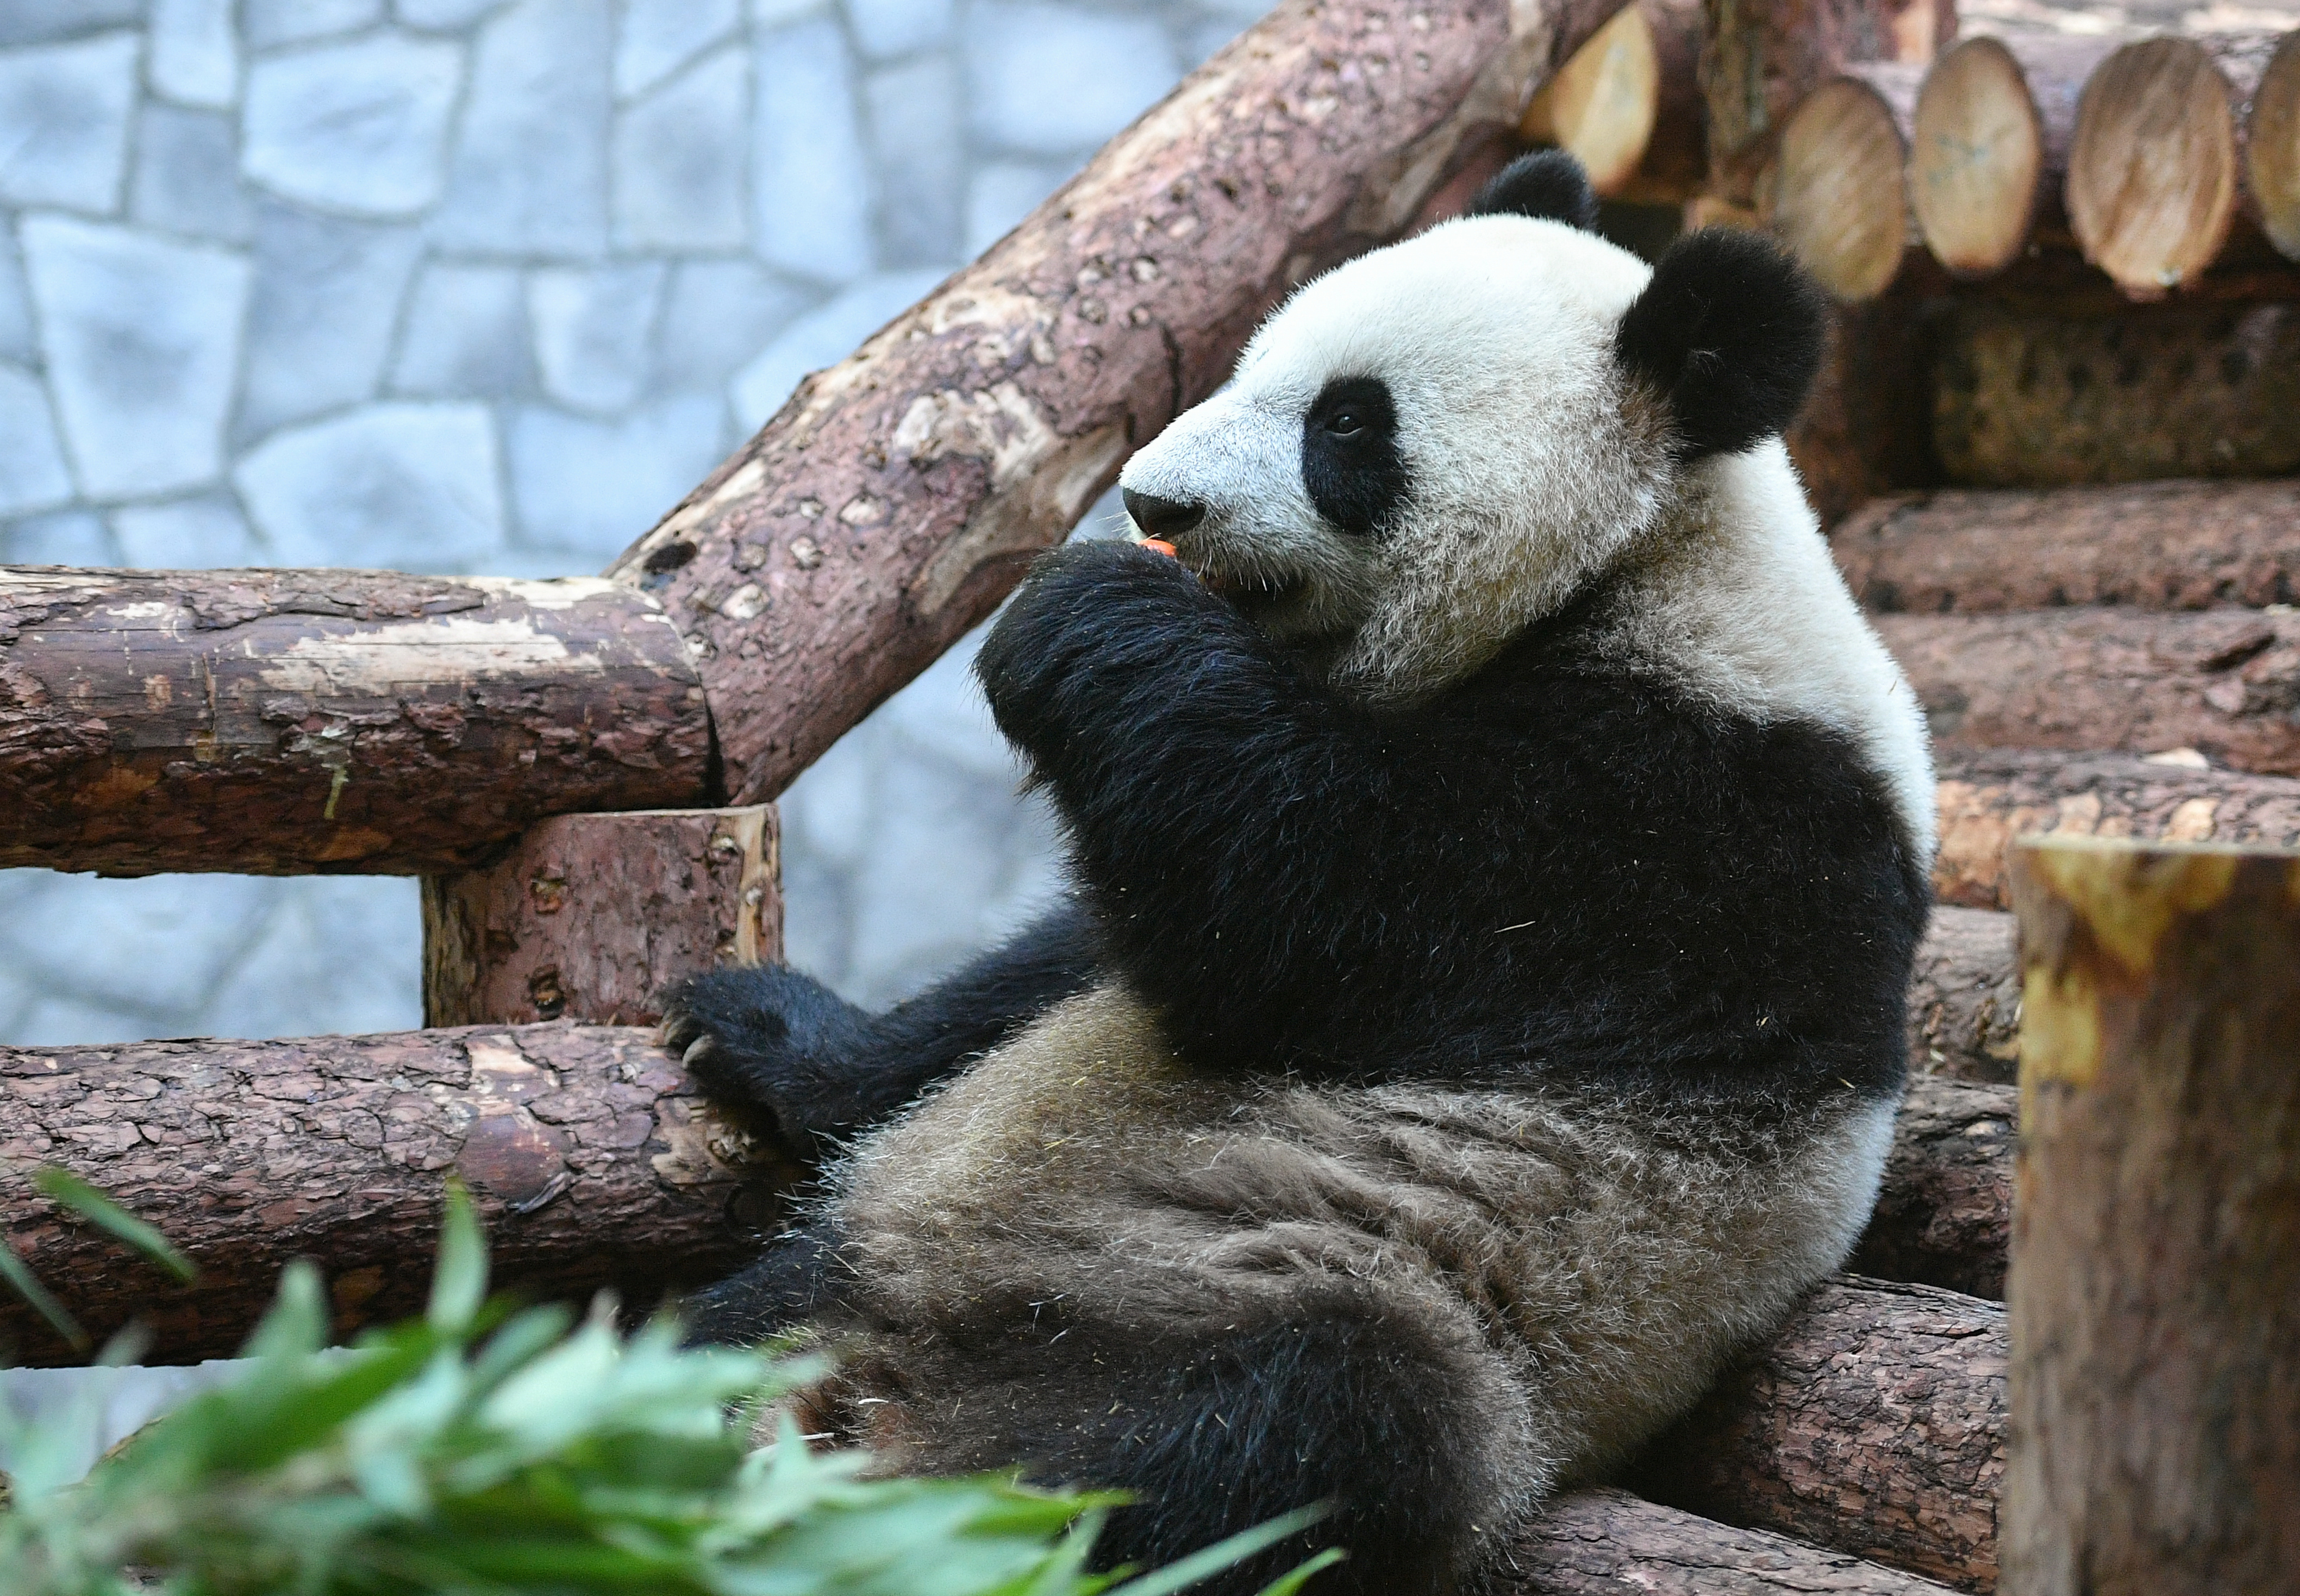 A giant panda sits in the enclosure before Russian President Vladimir Putin and Chinese President Xi Jinping visit the Moscow Zoo, which received a pair of giant pandas from China, in Moscow, Russia June 5, 2019. Sputnik/Alexander Vilf/Kremlin via REUTERS ATTENTION EDITORS - THIS IMAGE WAS PROVIDED BY A THIRD PARTY.